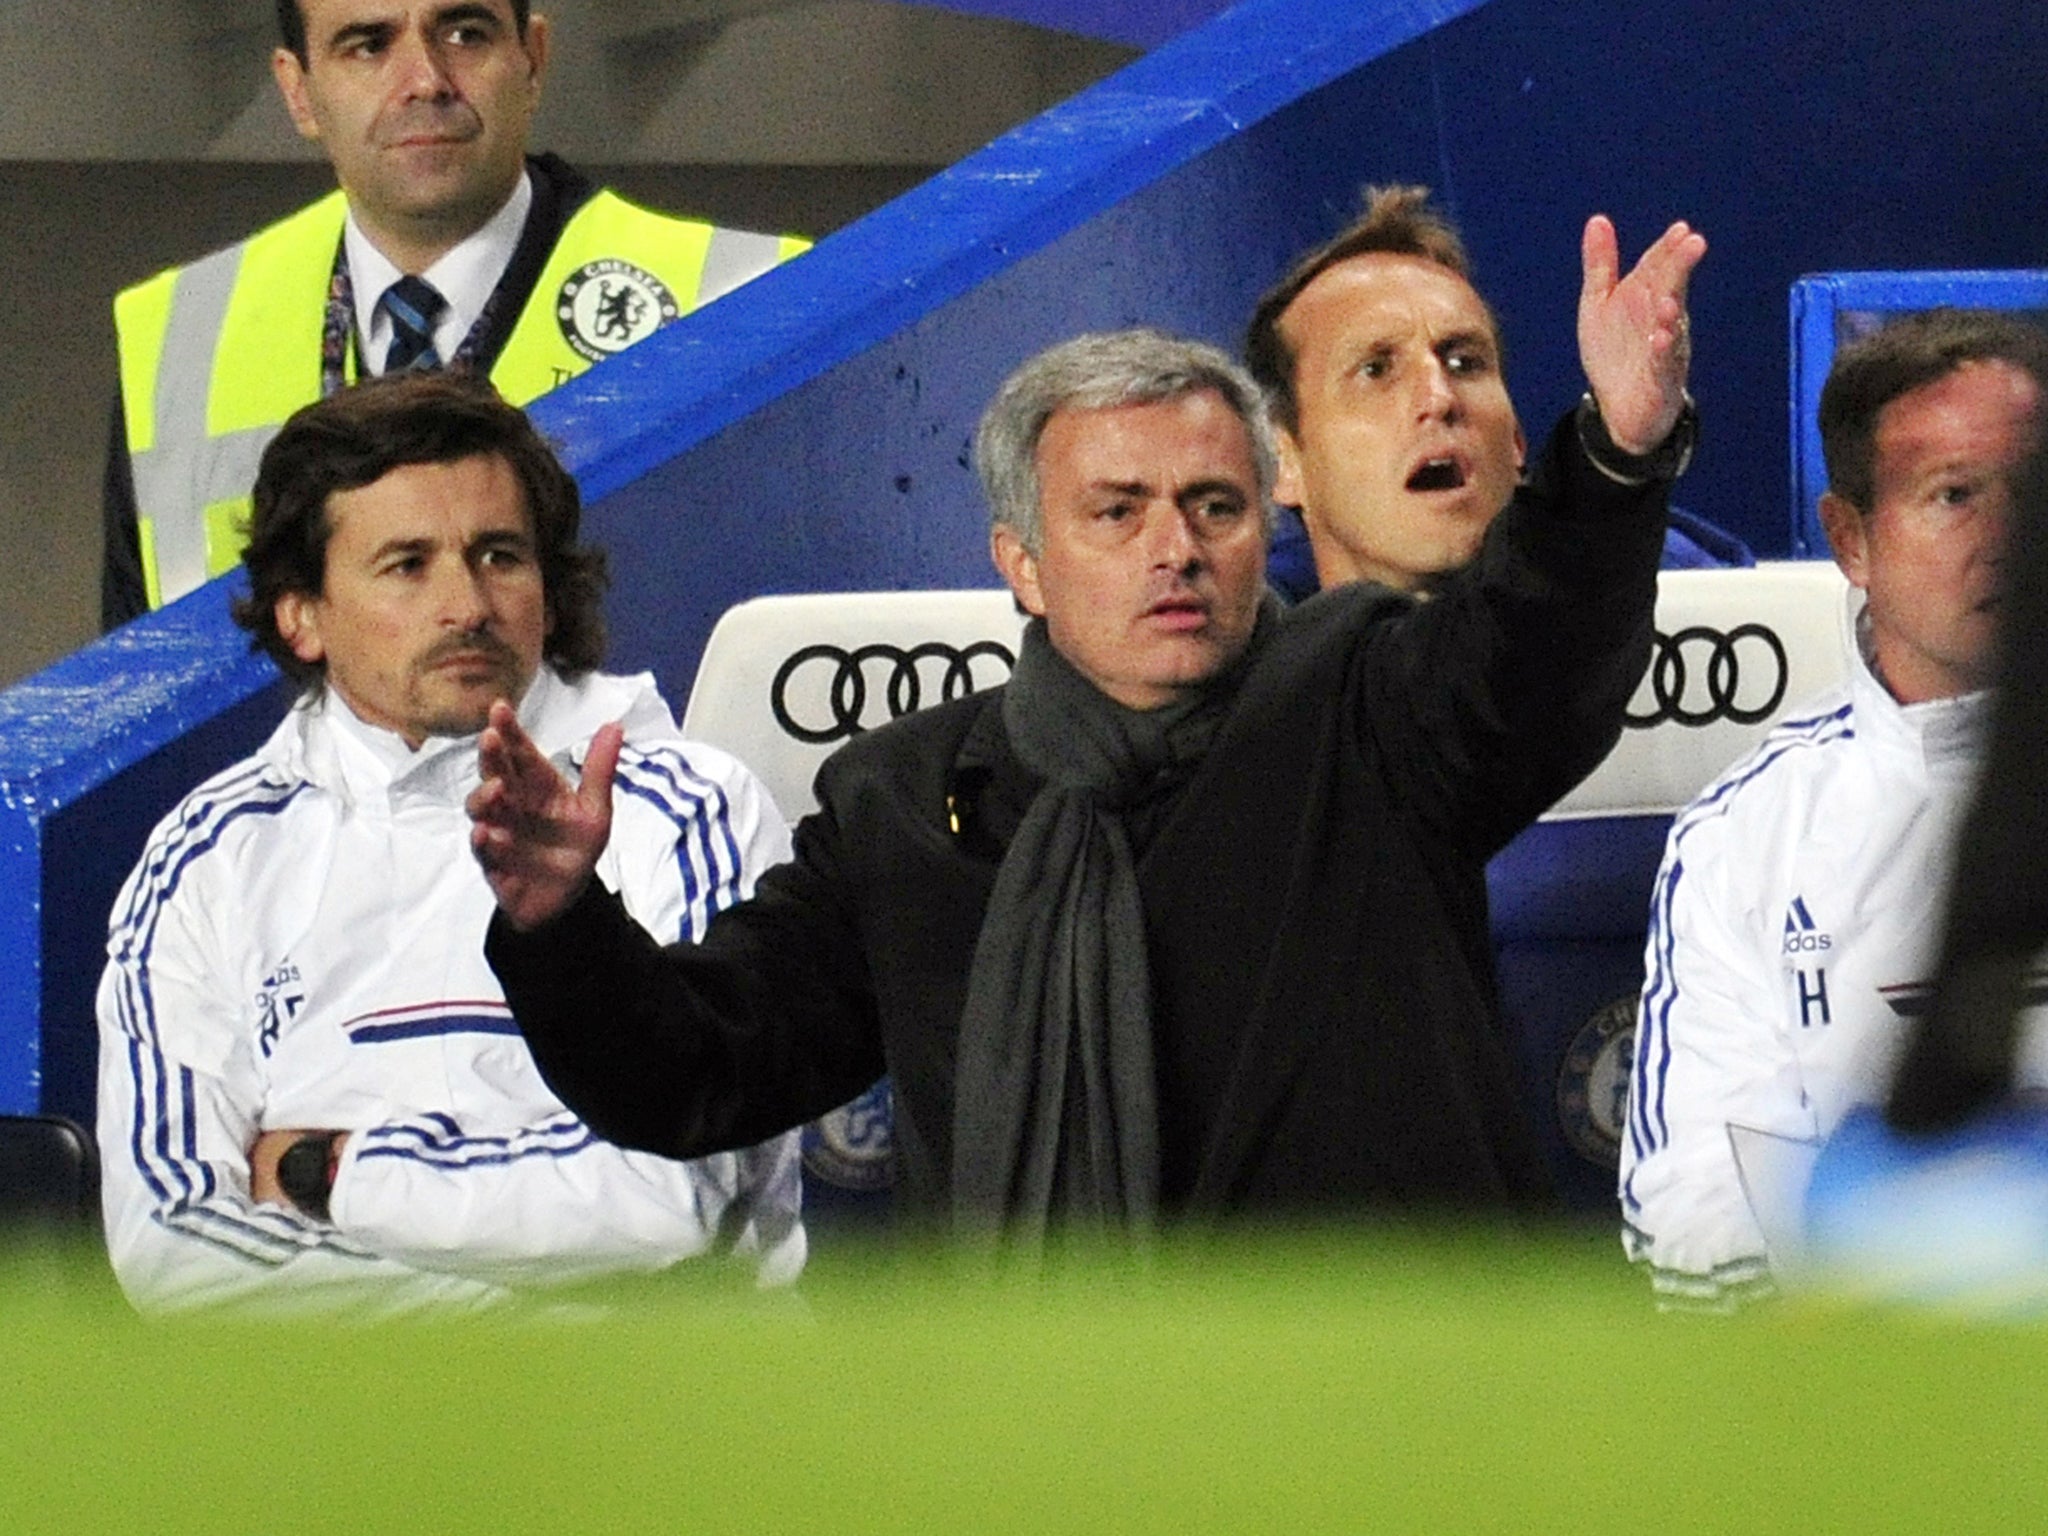 Jose Mourinho remonstrates on the sideline during Chelsea's 2-1 win over Manchester City